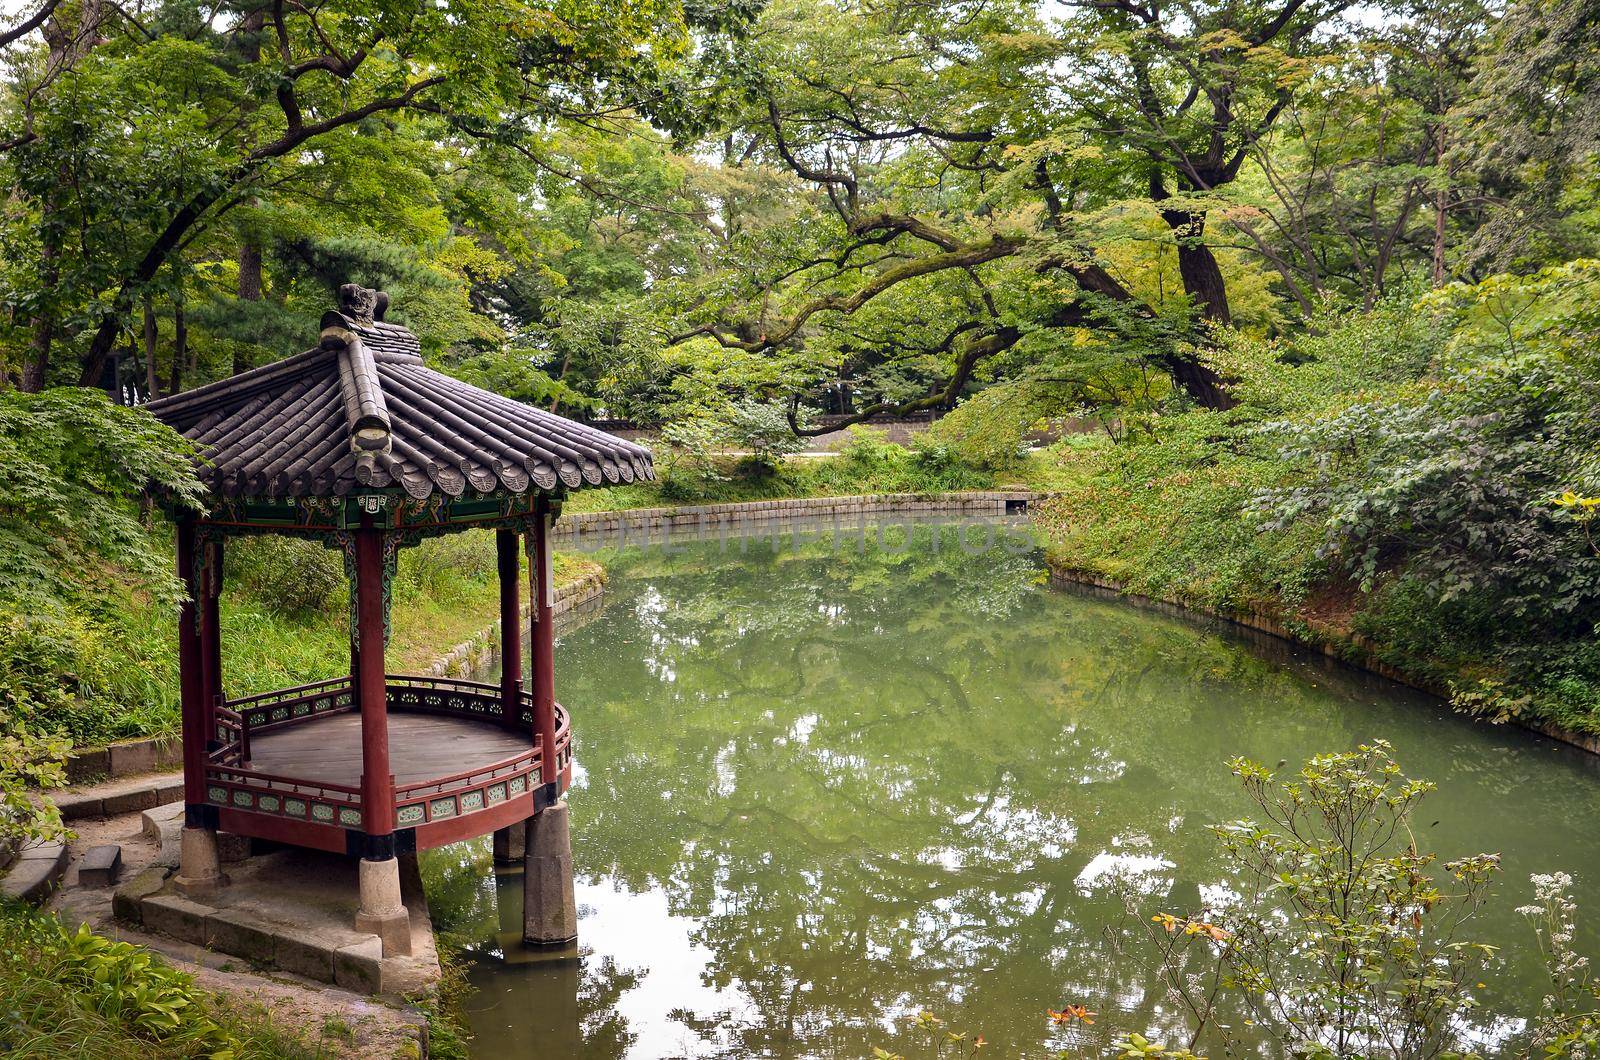 A Beautiful Korean Traditional Garden with gazebo and small lake.